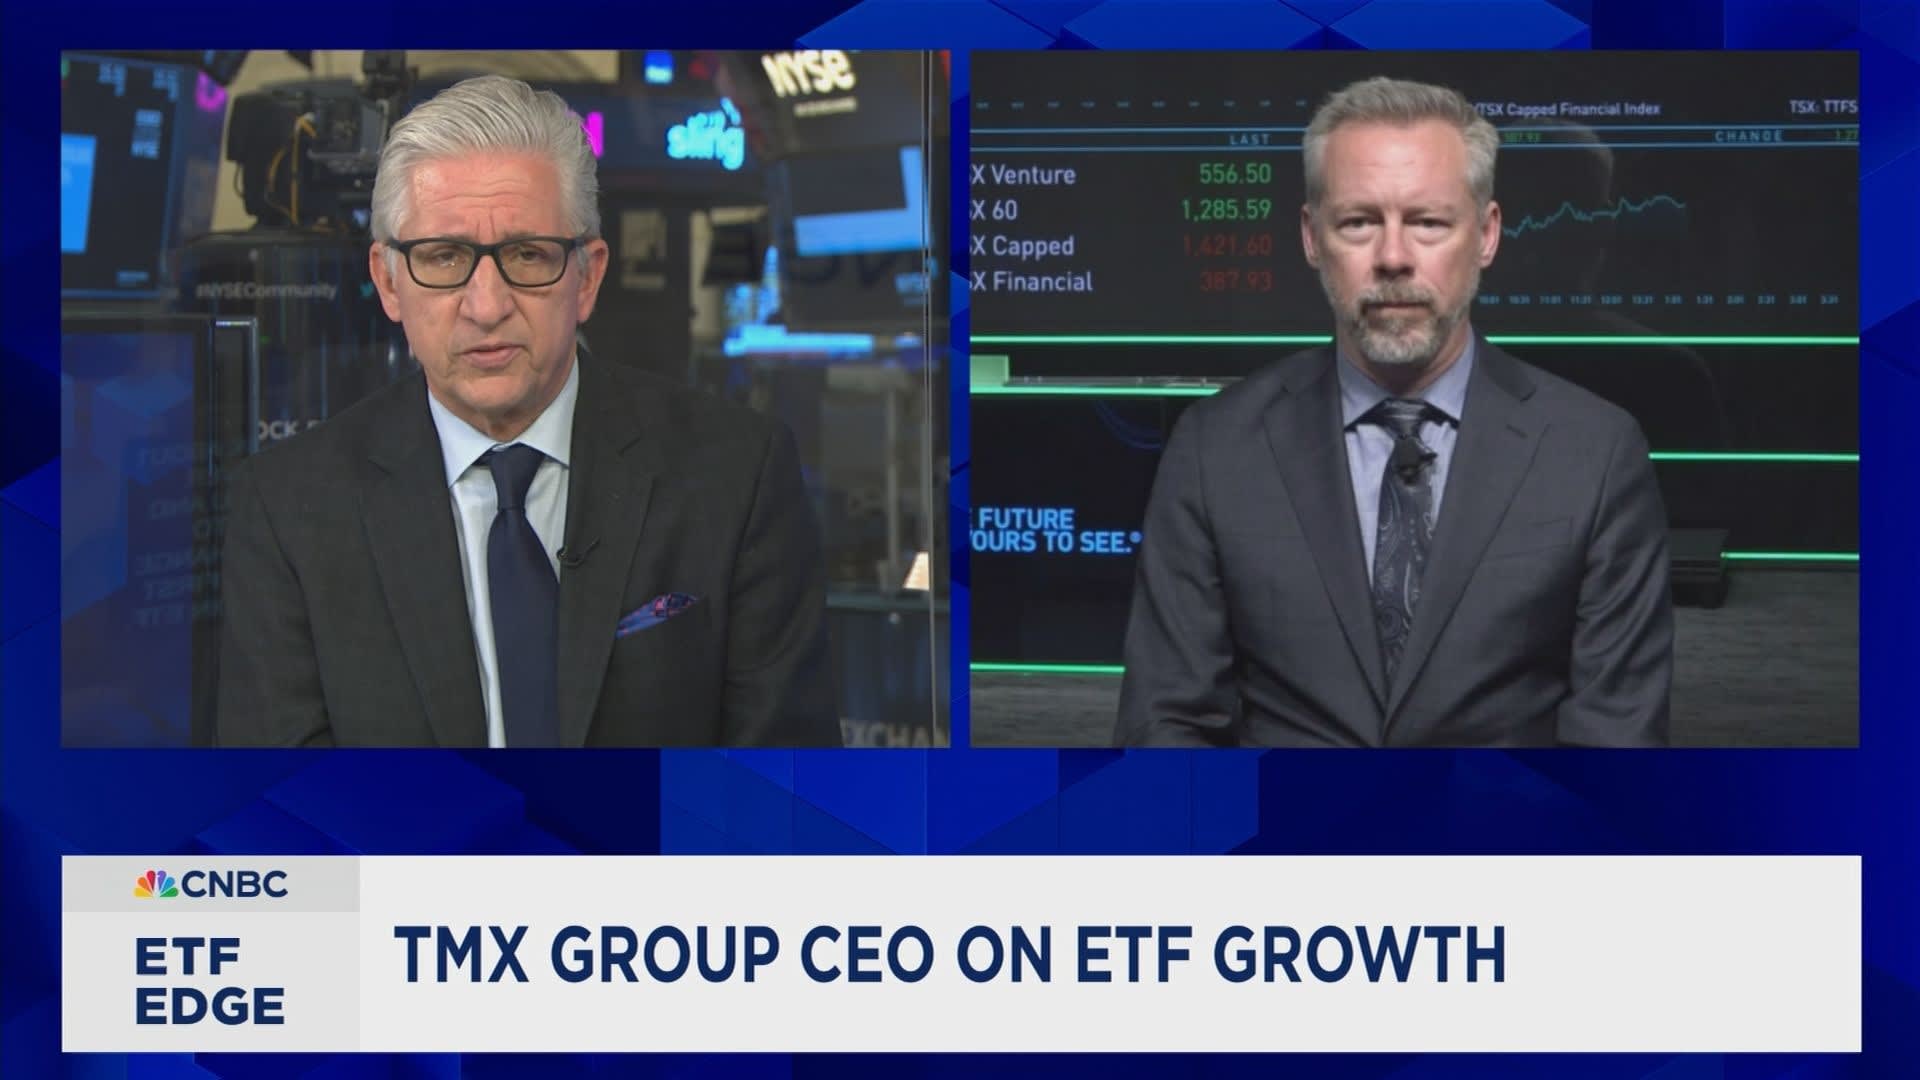 â€˜One of the most important innovations in investingâ€™: TMX CEO jumps deeper into ETFs